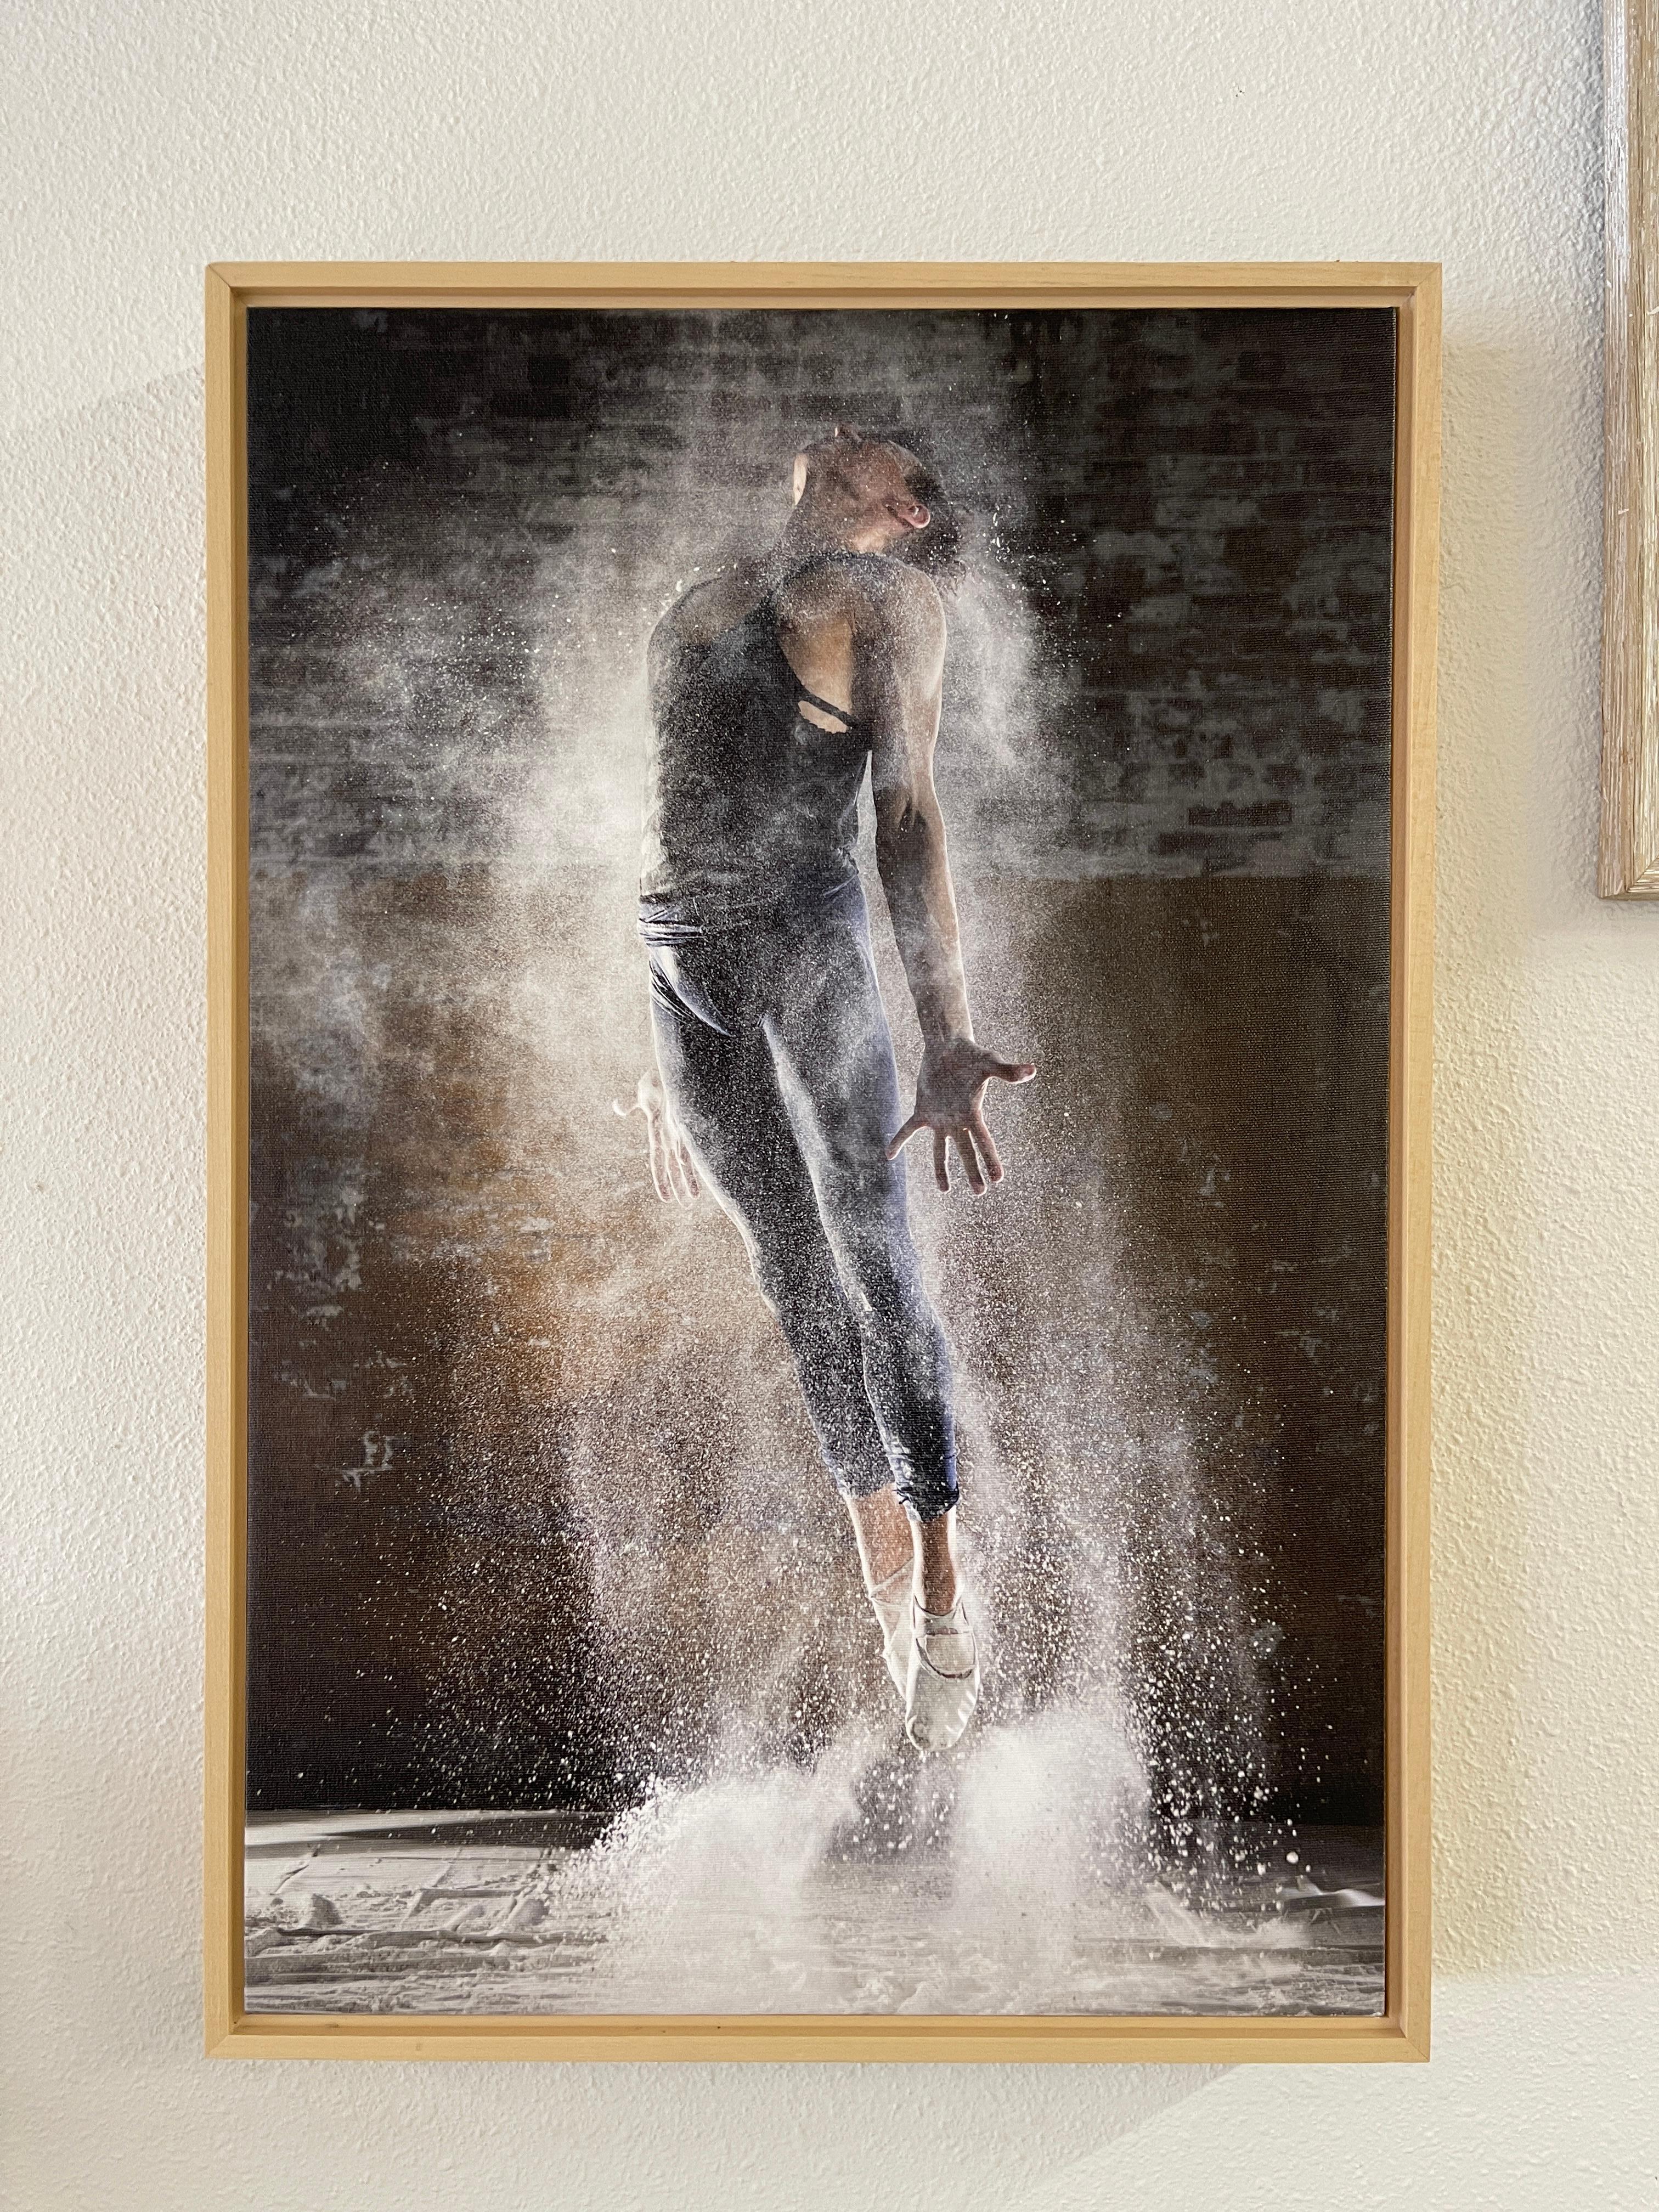 Our gallery is pleased to be have the opportunity to represent the internationally renowned Photographer Nichola Majocchi. The photograph is stretched and framed in a natural wood free floating frame and ready to hang. This photograph is titled as